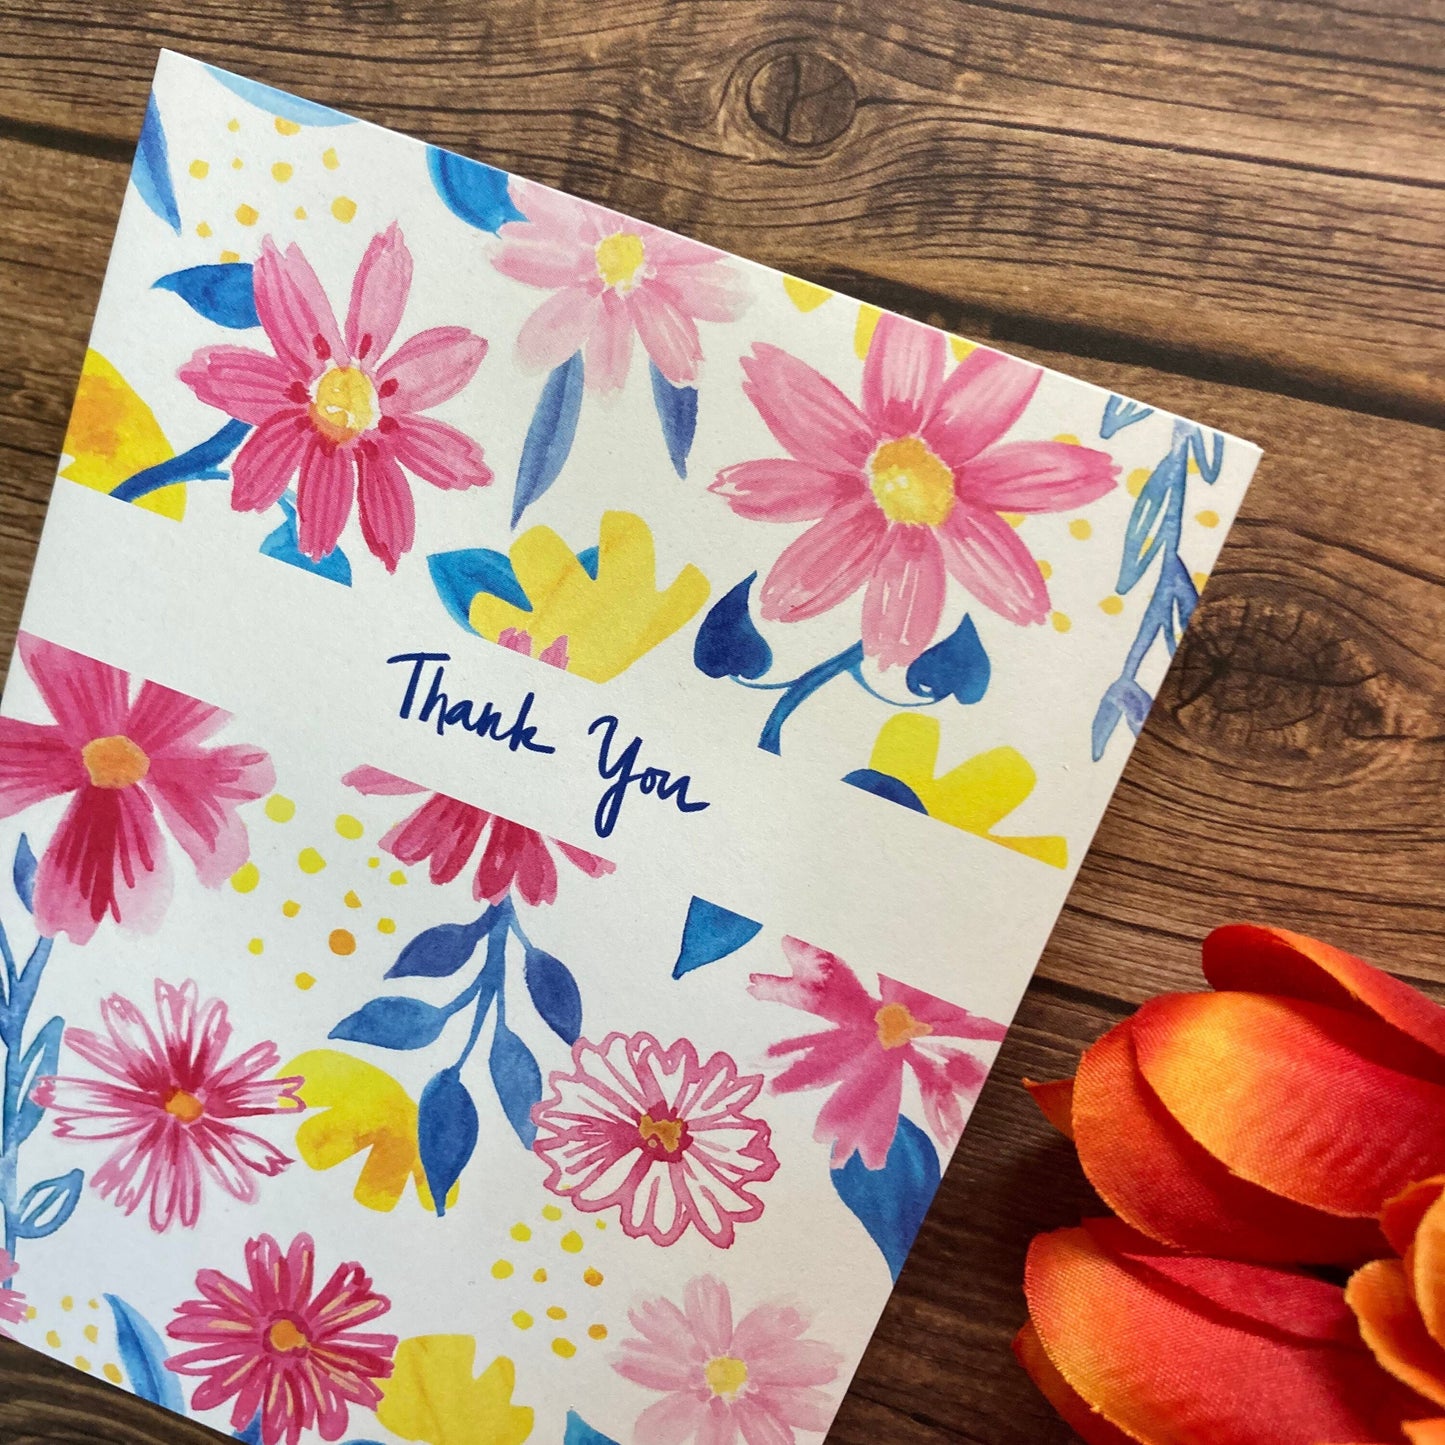 THANKS - Yellow Florals - bouquet, flowers, anytime appreciation, Eco-Friendly Notecards by Adriana Bergstrom (Adriprints)